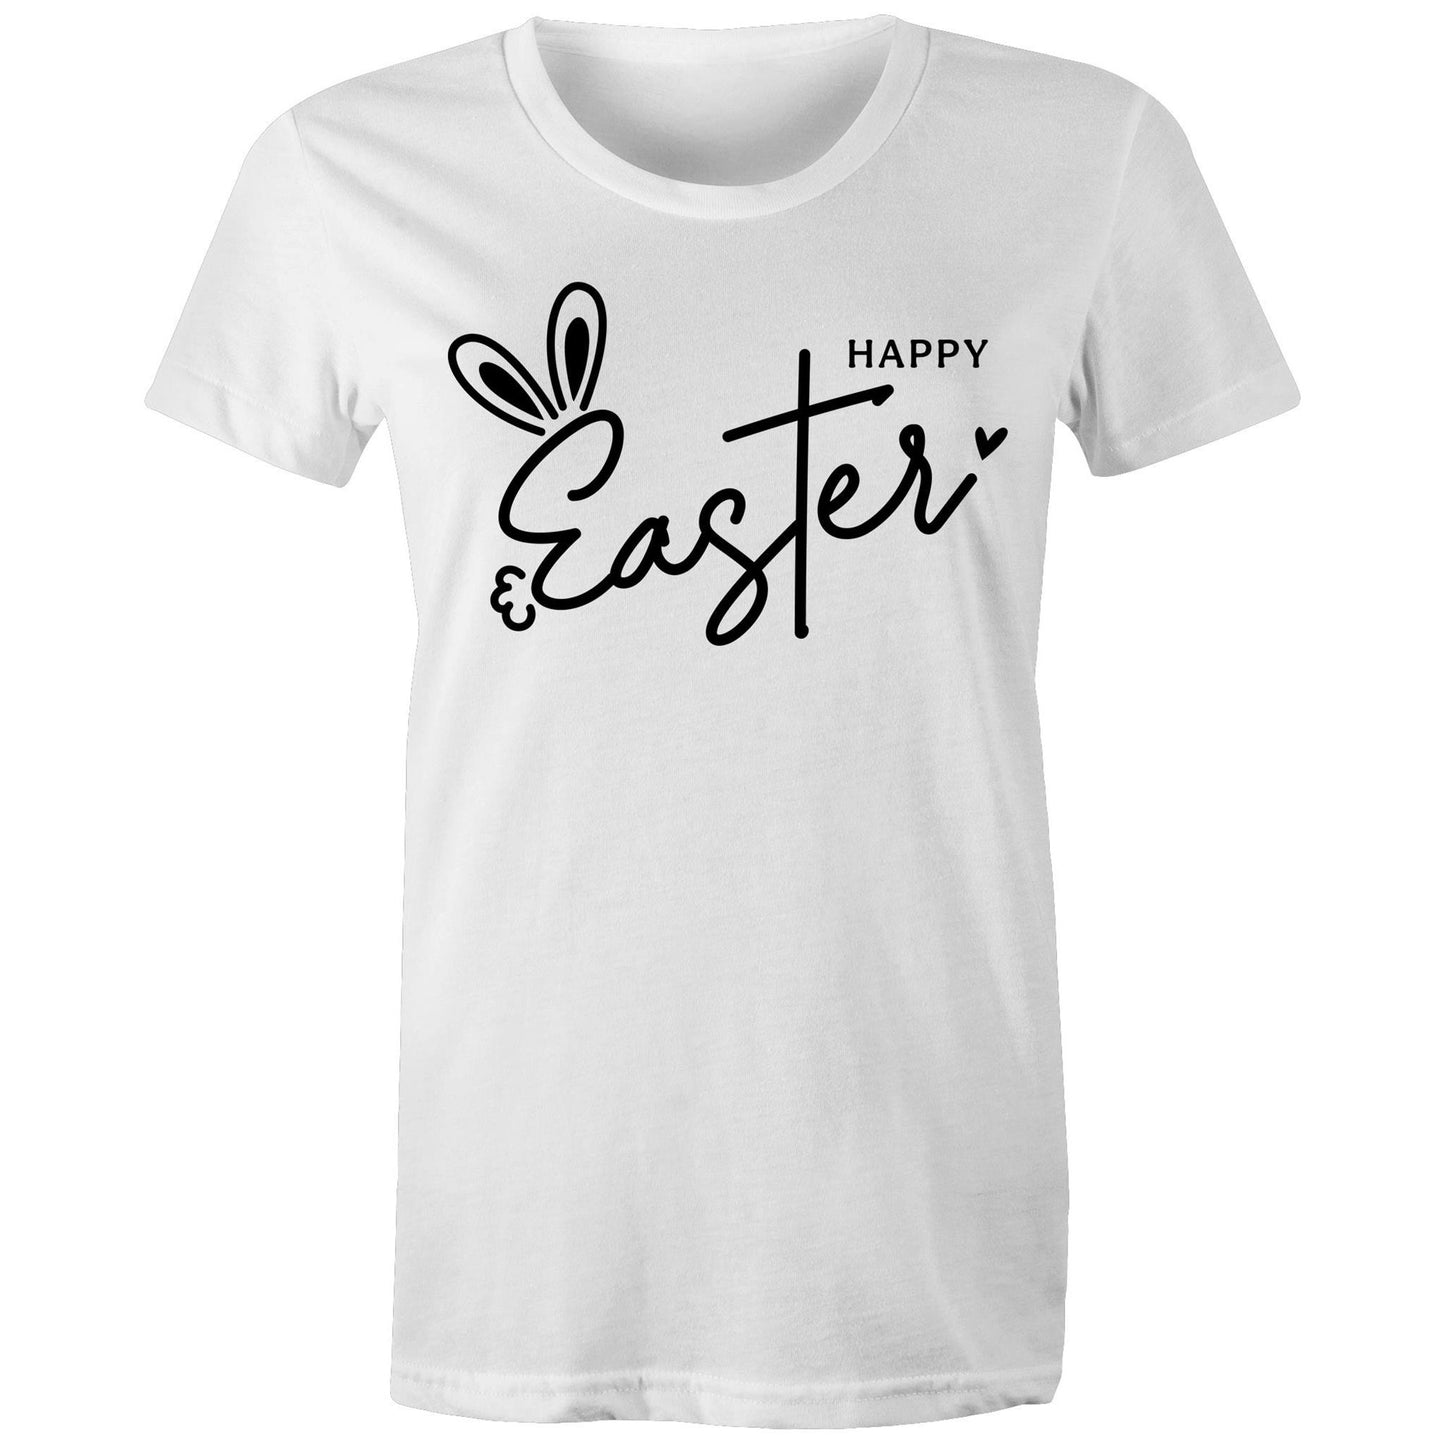 Happy Easter with Bunny Ears Women's T Shirt